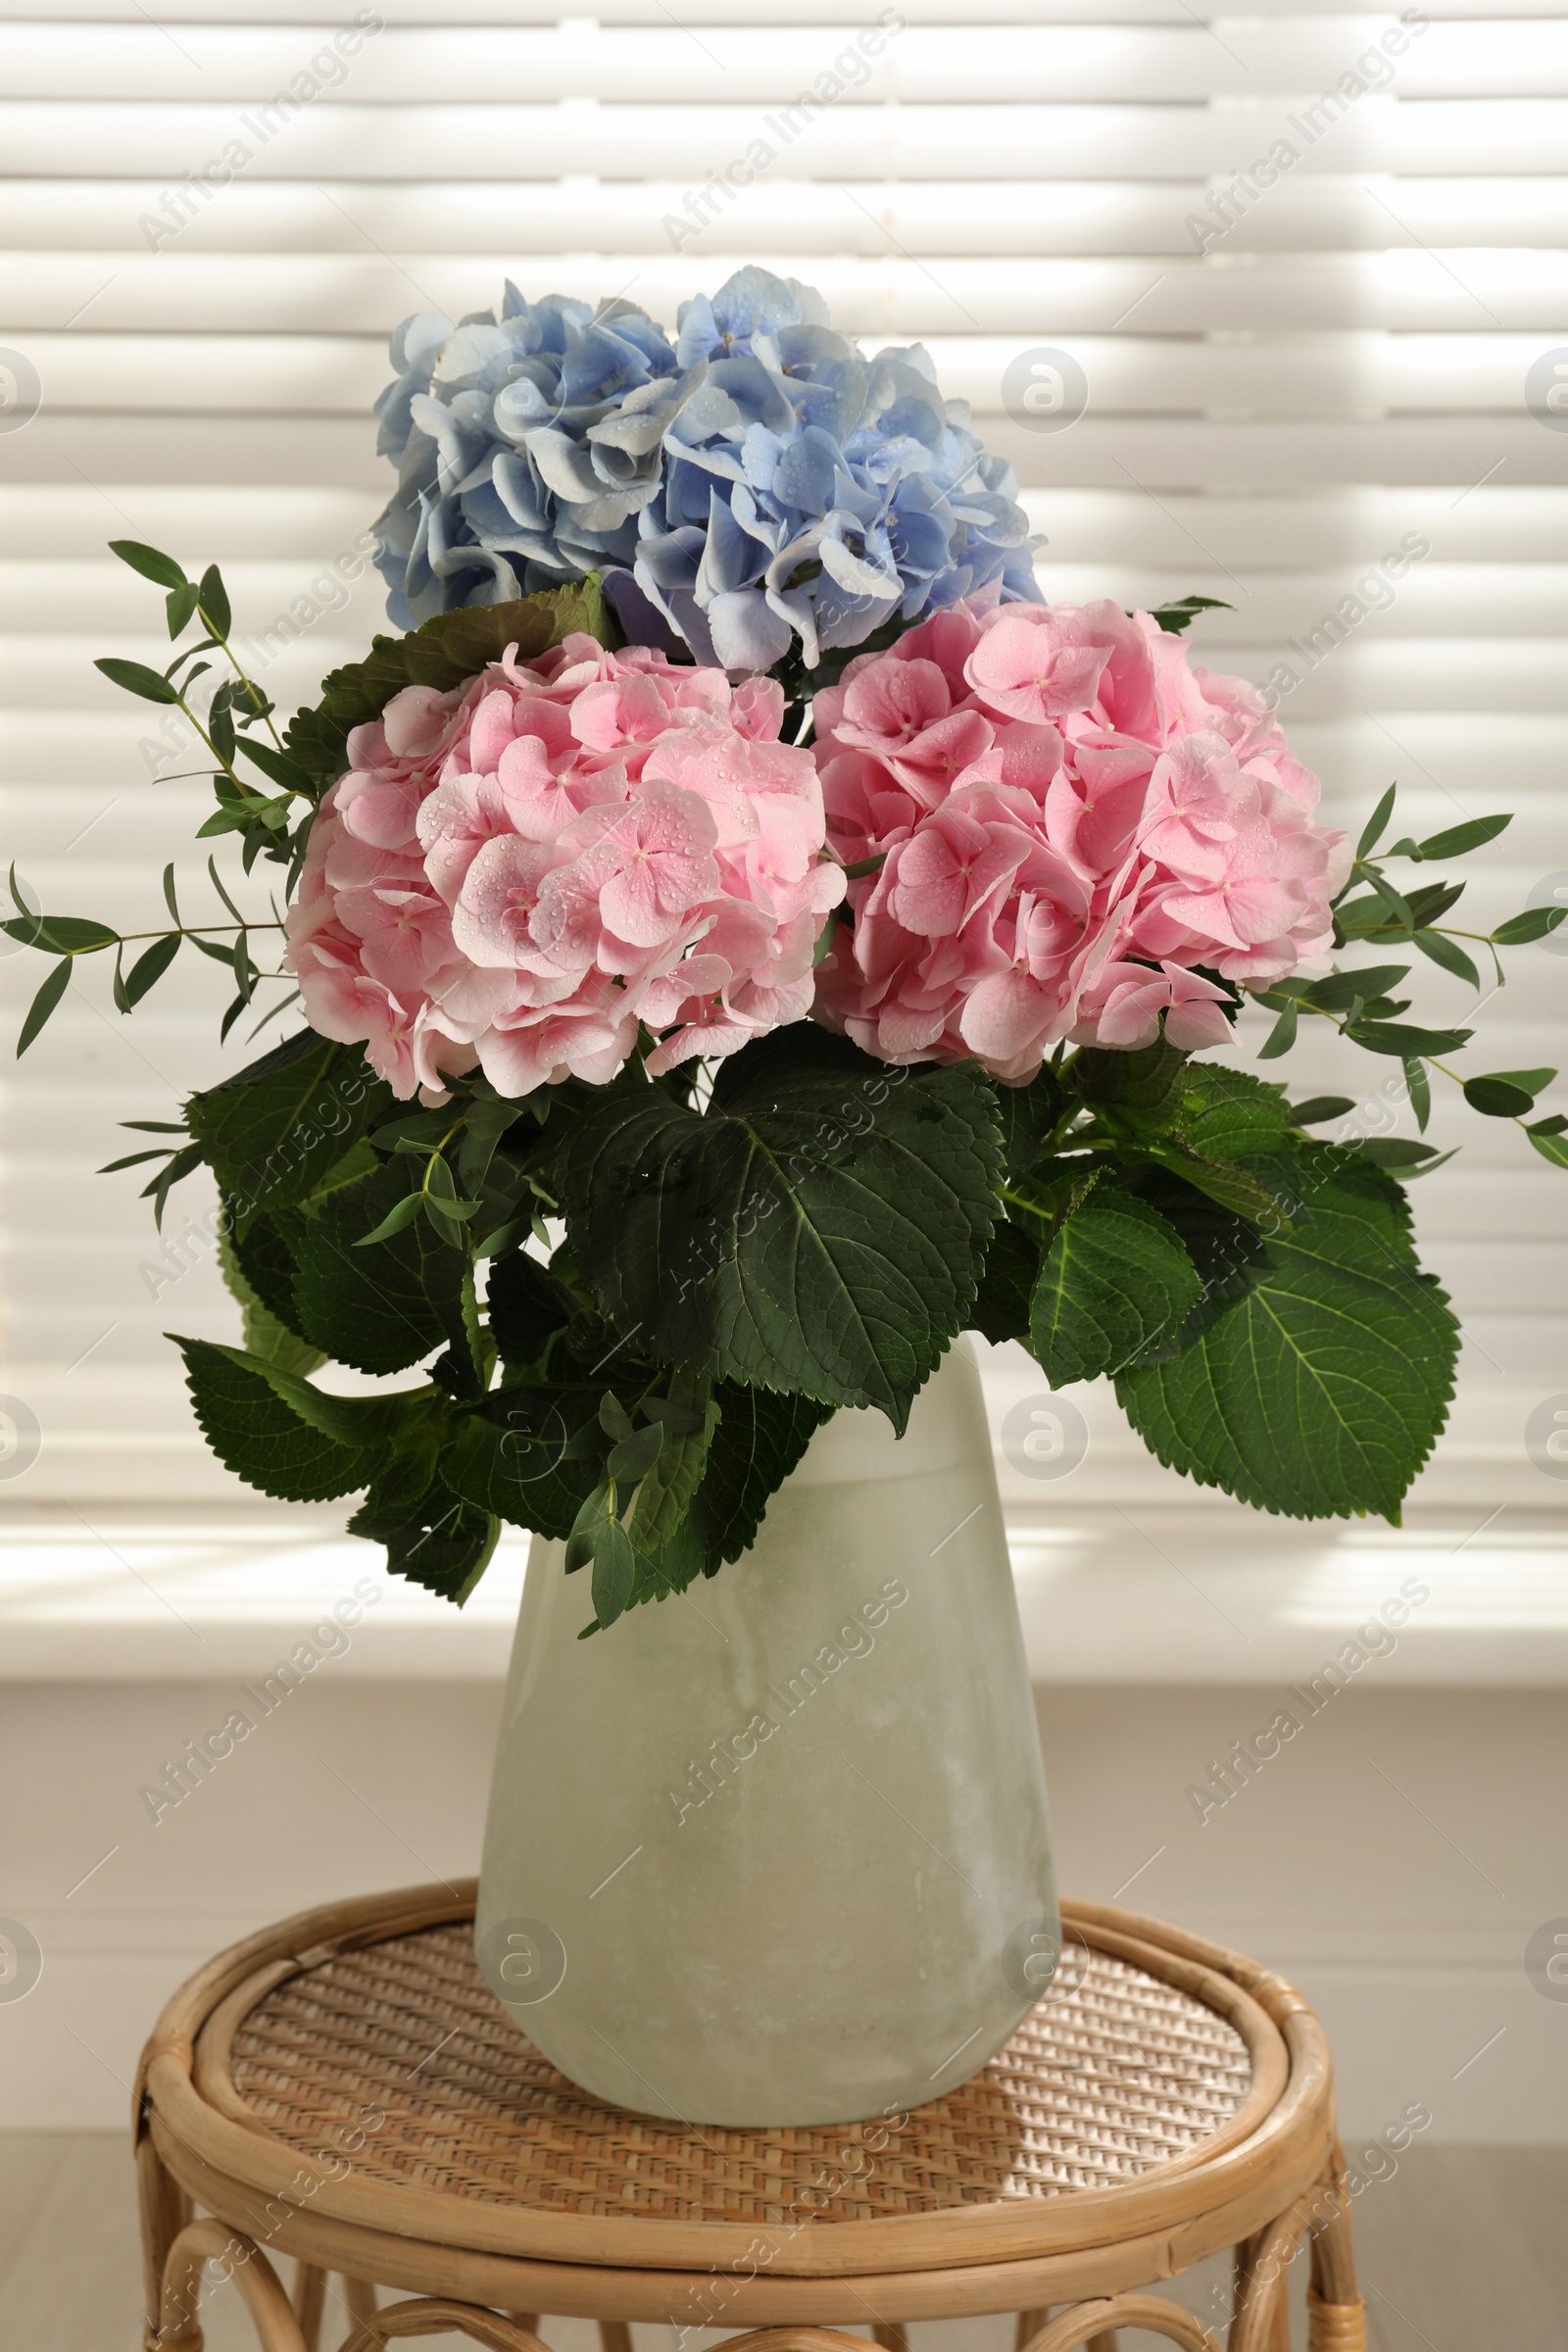 Photo of Beautiful hortensia flowers in vase on wicker stand indoors